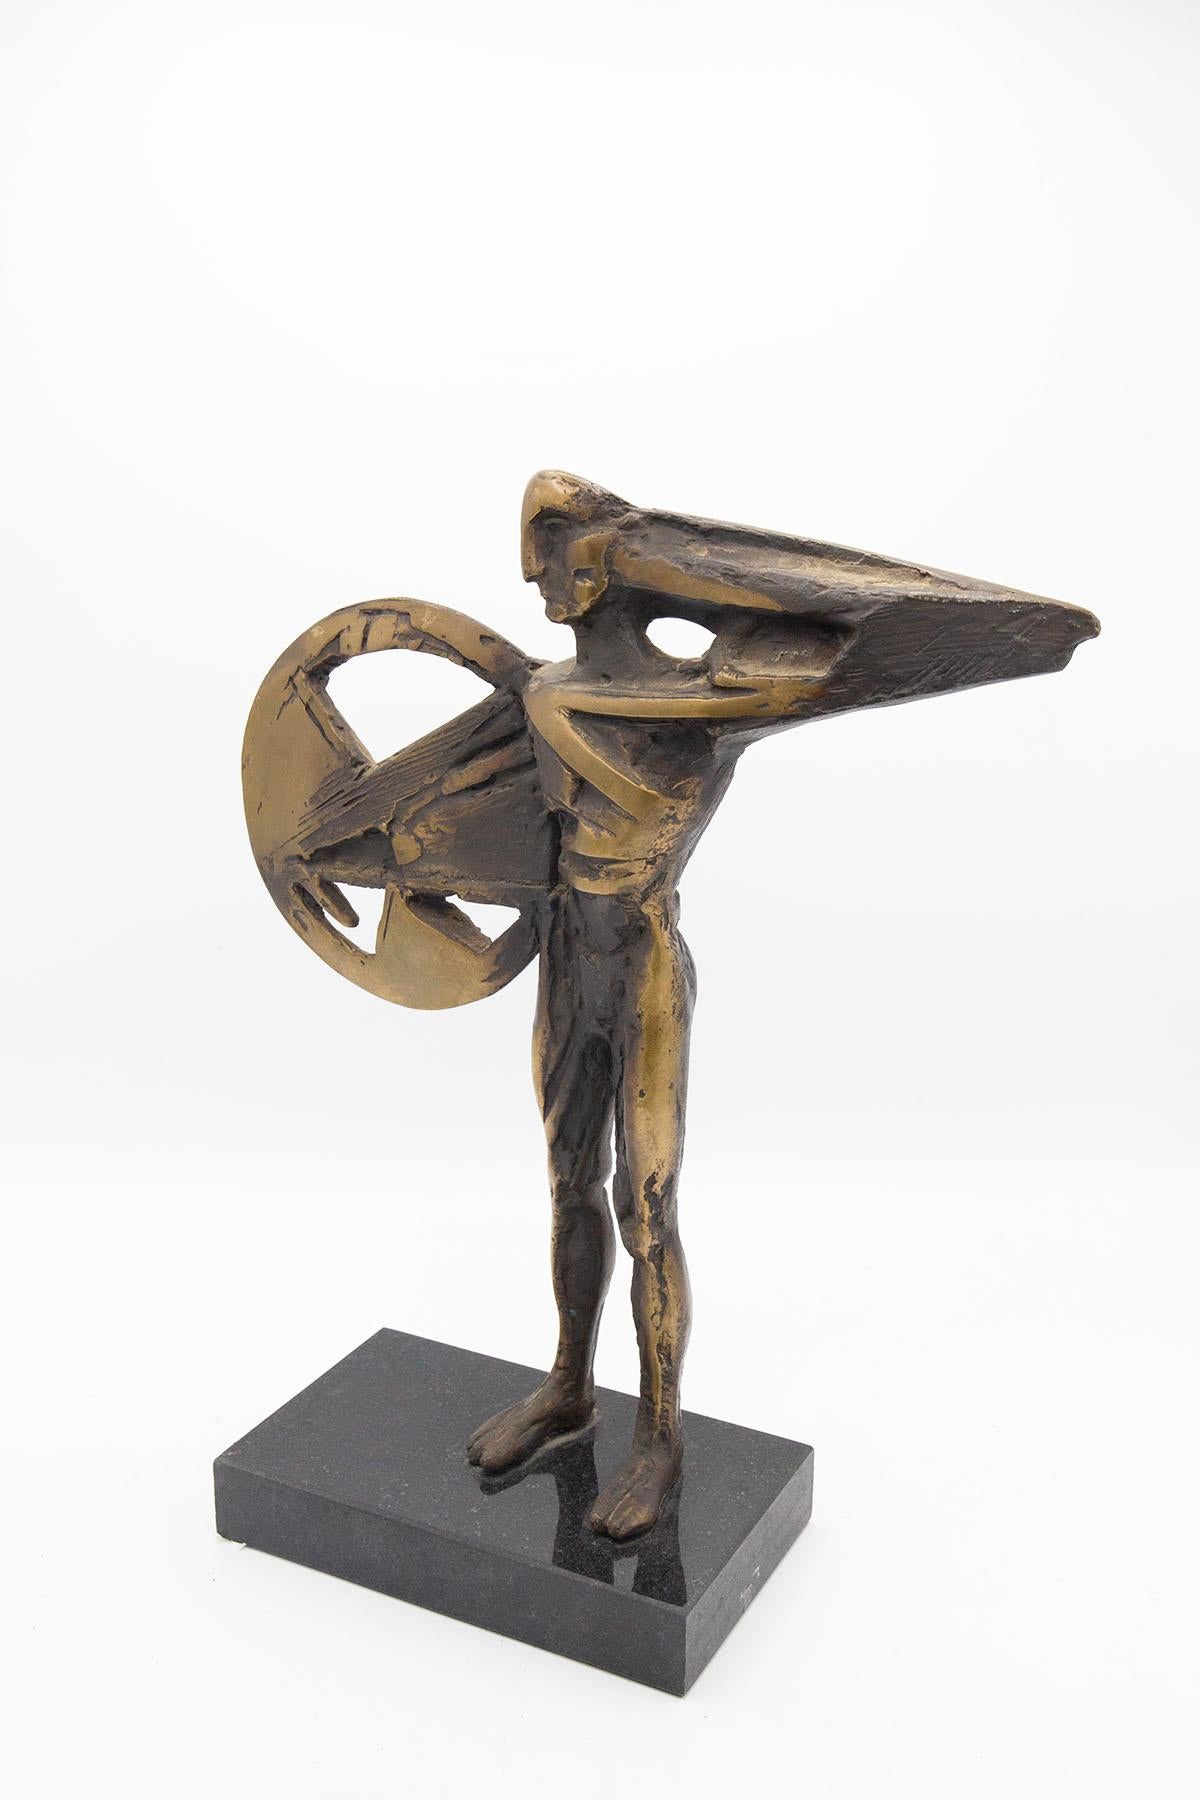 The sculpture we want to tell you about is a fascinating example of Italian Futurist art from the 1930s, made of bronze. The Futurist period, which emerged in Italy in the early 20th century, was characterized by a fervent emphasis on dynamism,